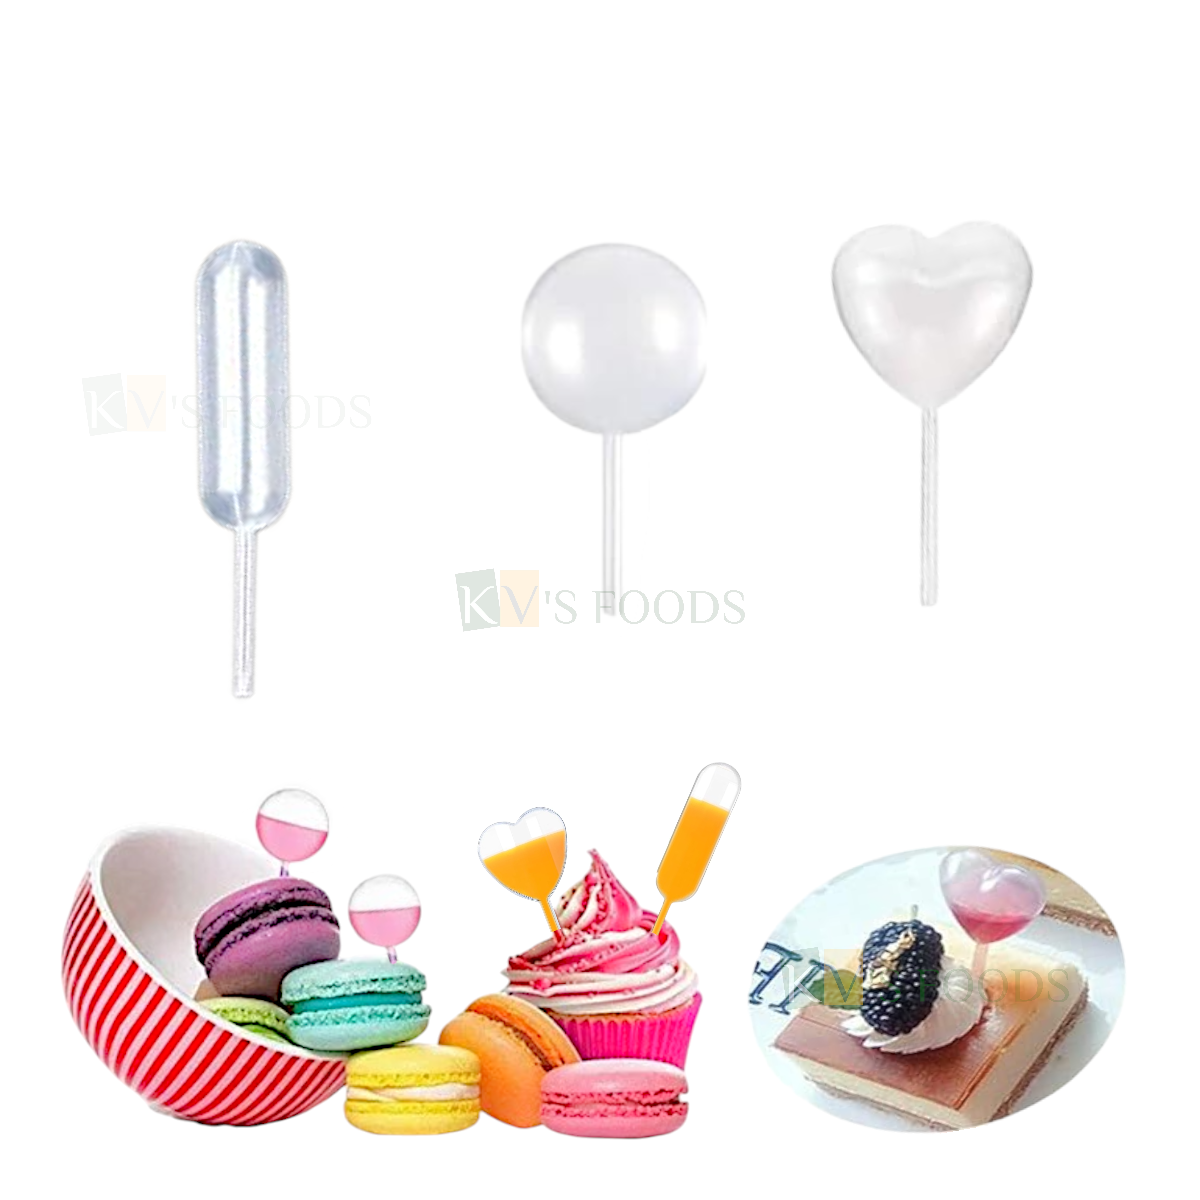 12 PCS Transparent Clear Round Heart Cylindrical Different Shapes Mini Squeeze Pipettes Liquid Dropper Pipette Juice Flavor Dropper for Birthday Cakes Chocolate Cupcakes Ice Cream Desserts Inserts